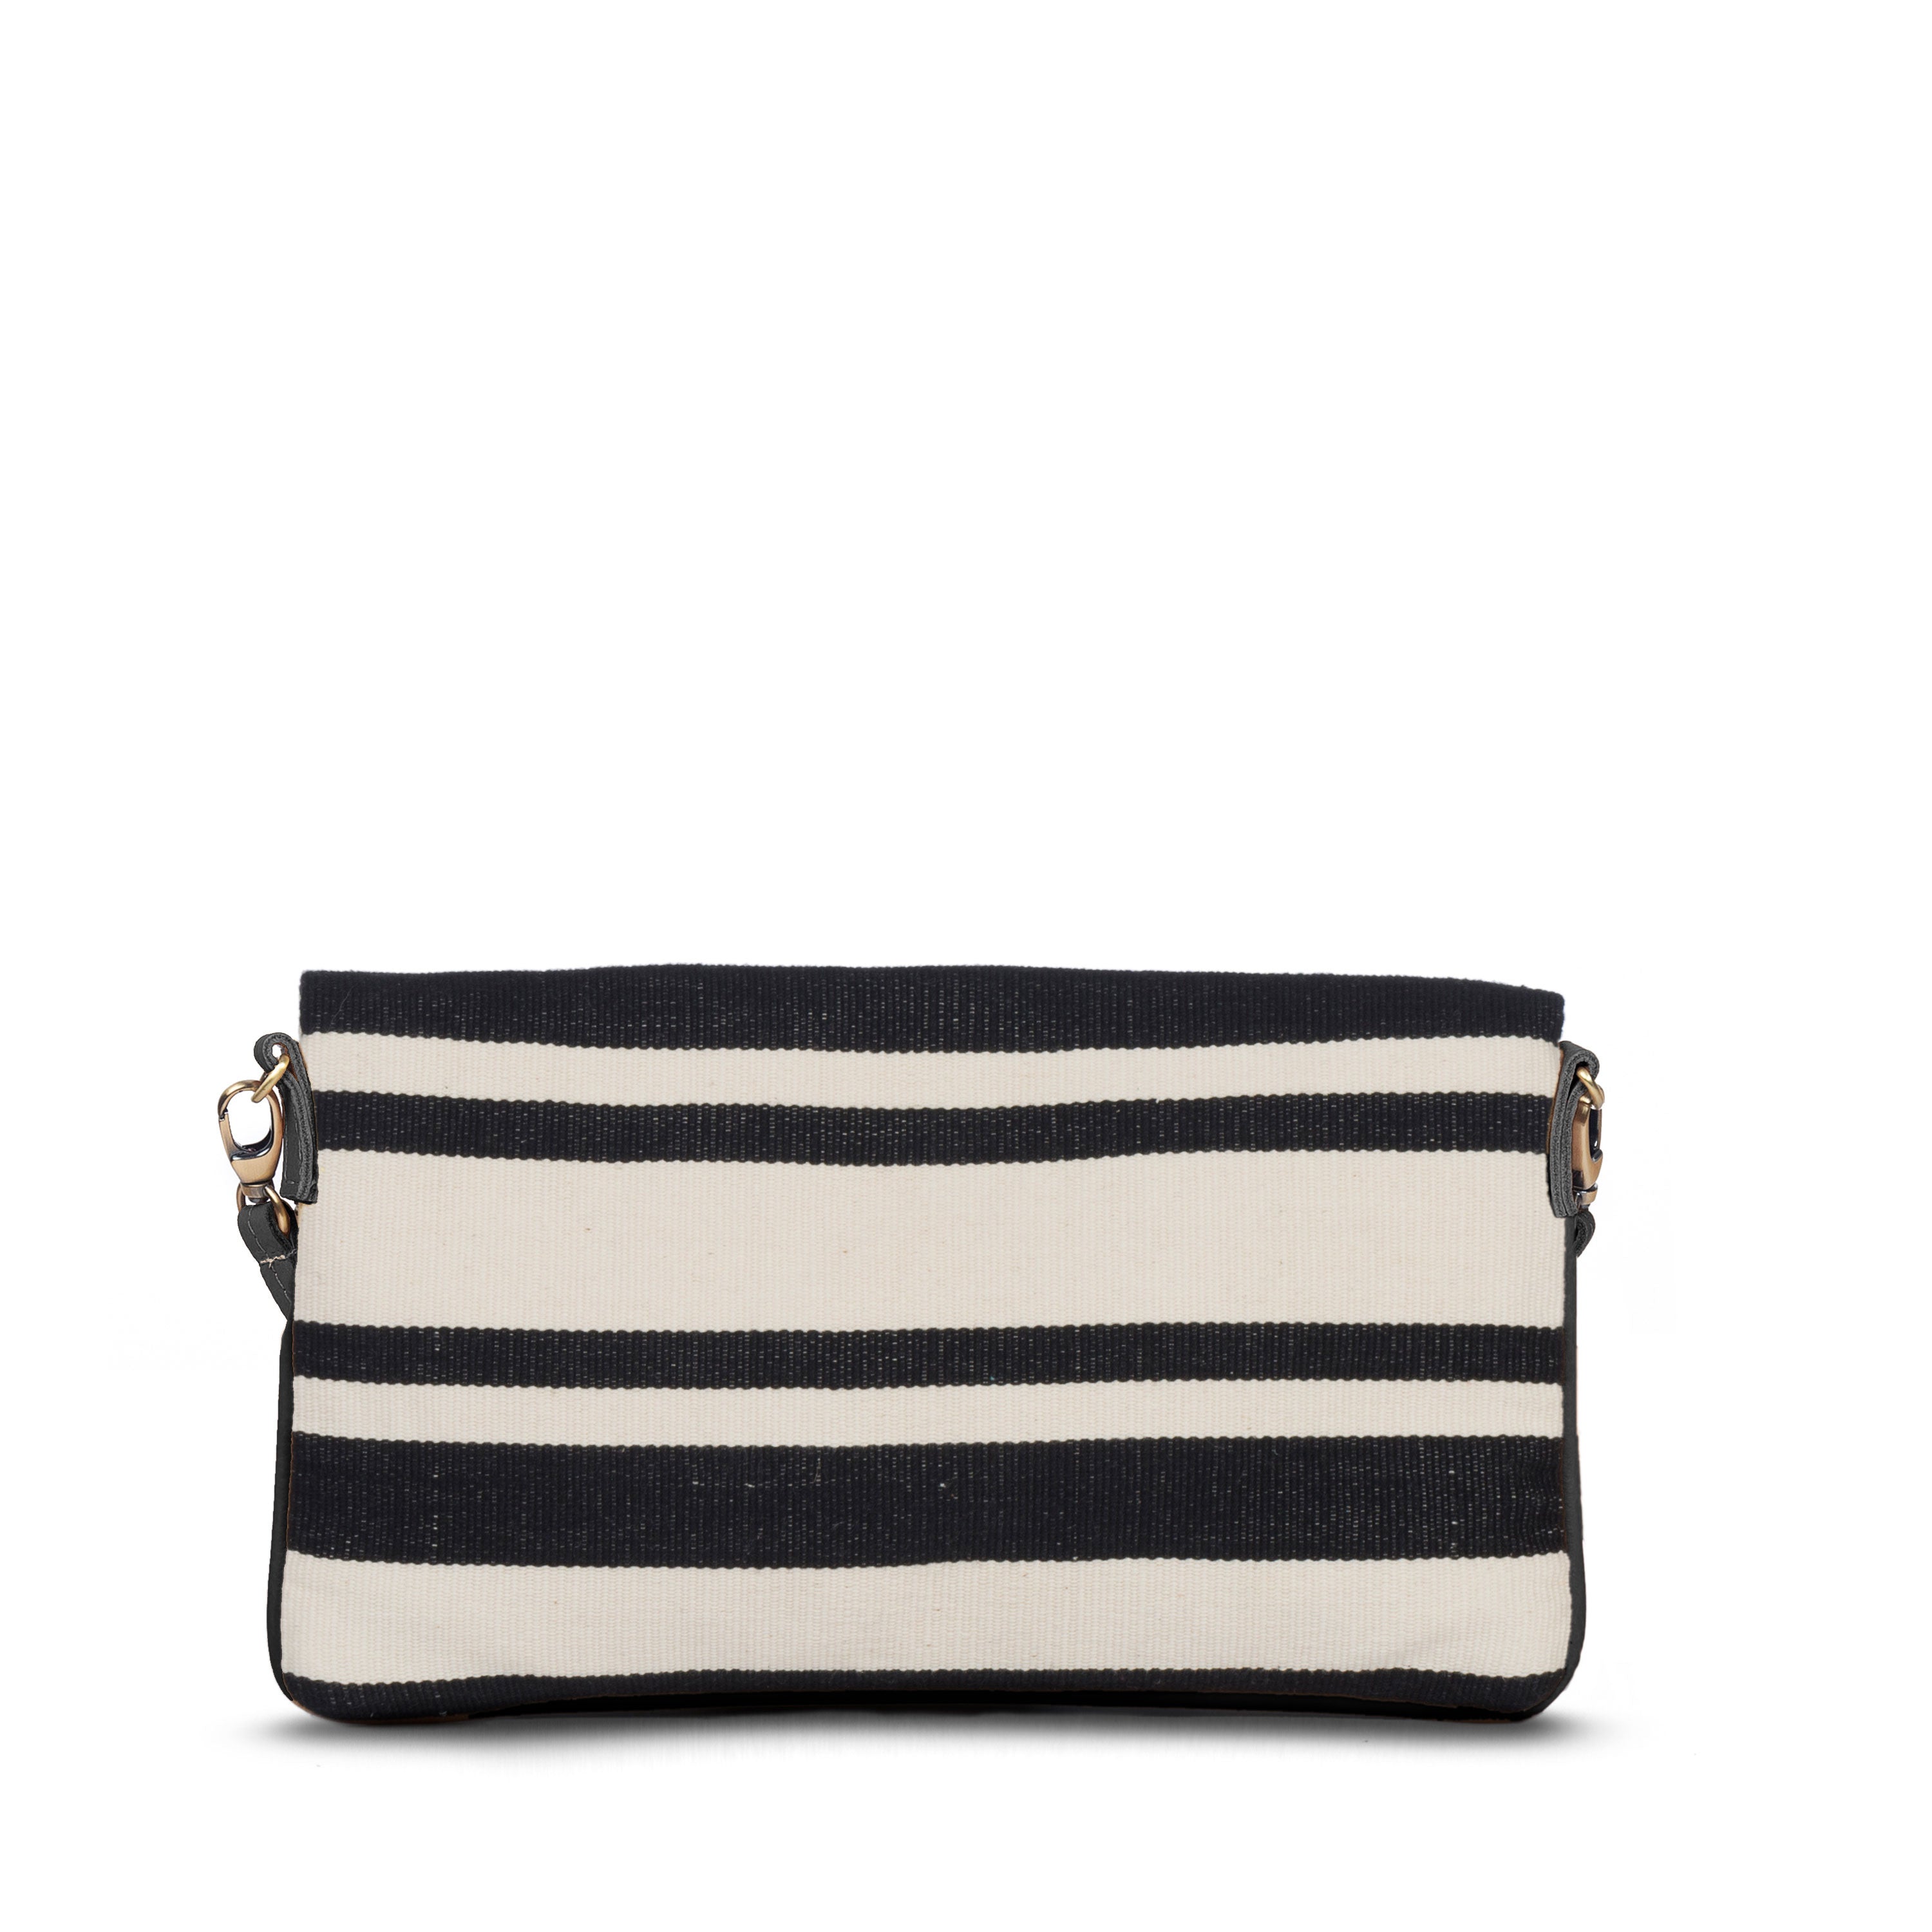 Back of the artisan hand woven Paulina Crossbody-to-Clutch bag in Black Block Stripe. The back pattern has horizontal black and white stripes.